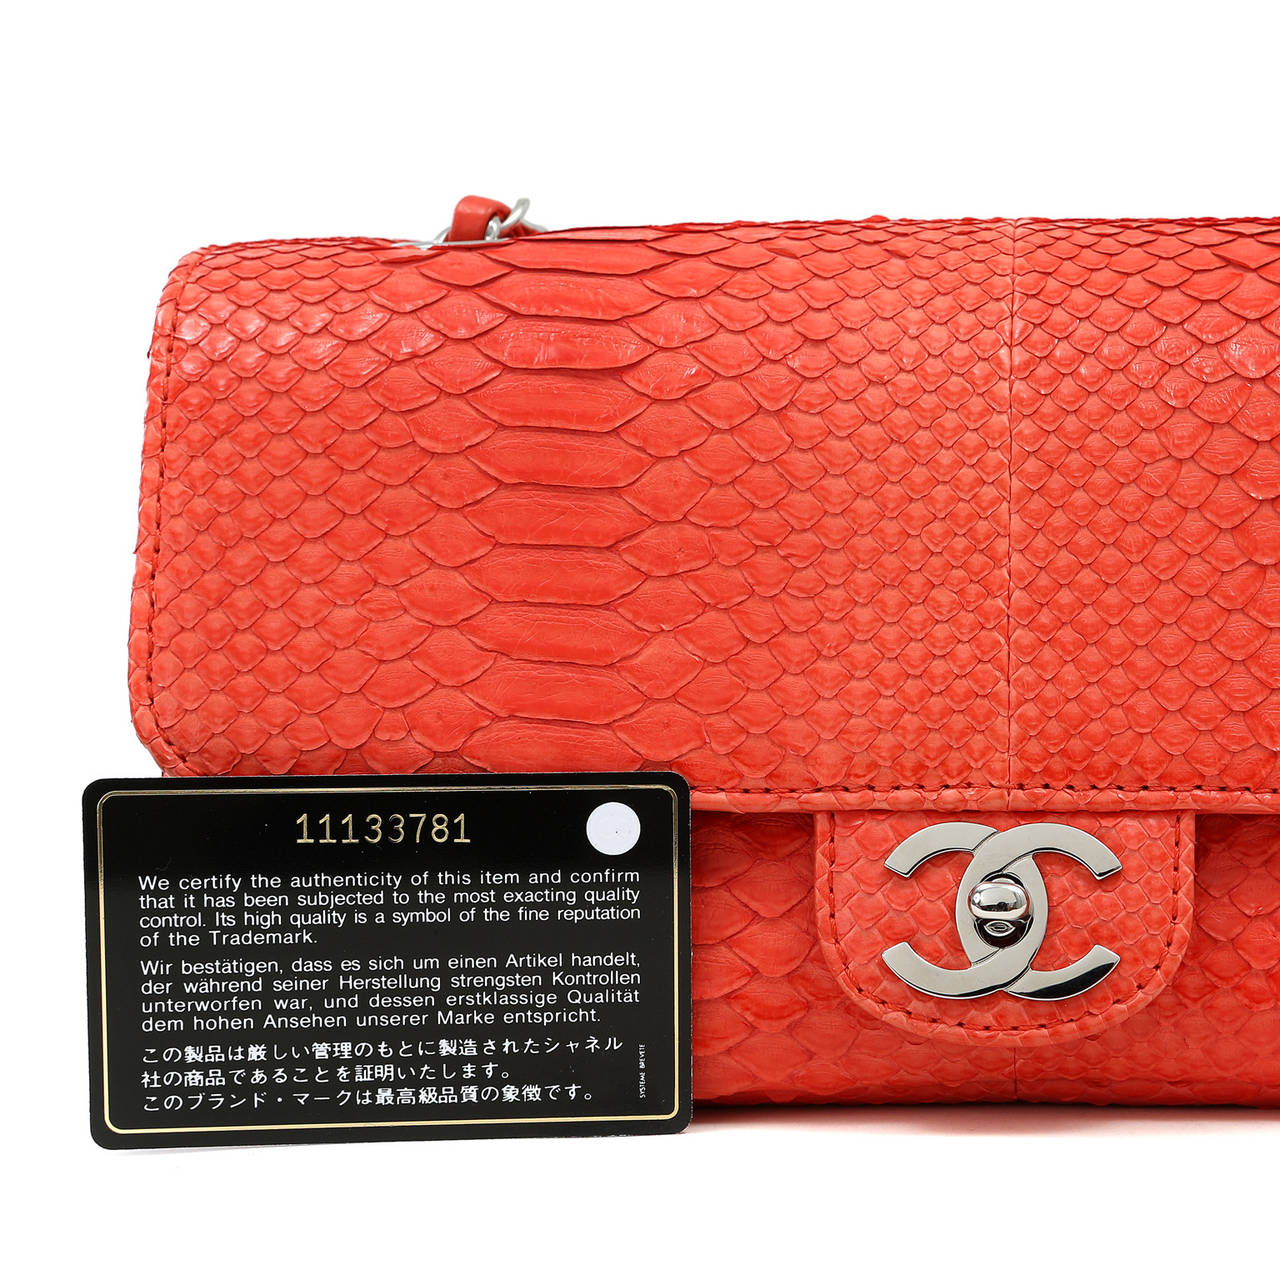 Chanel Python Classic Flap Bag CORAL with silver hardware 4